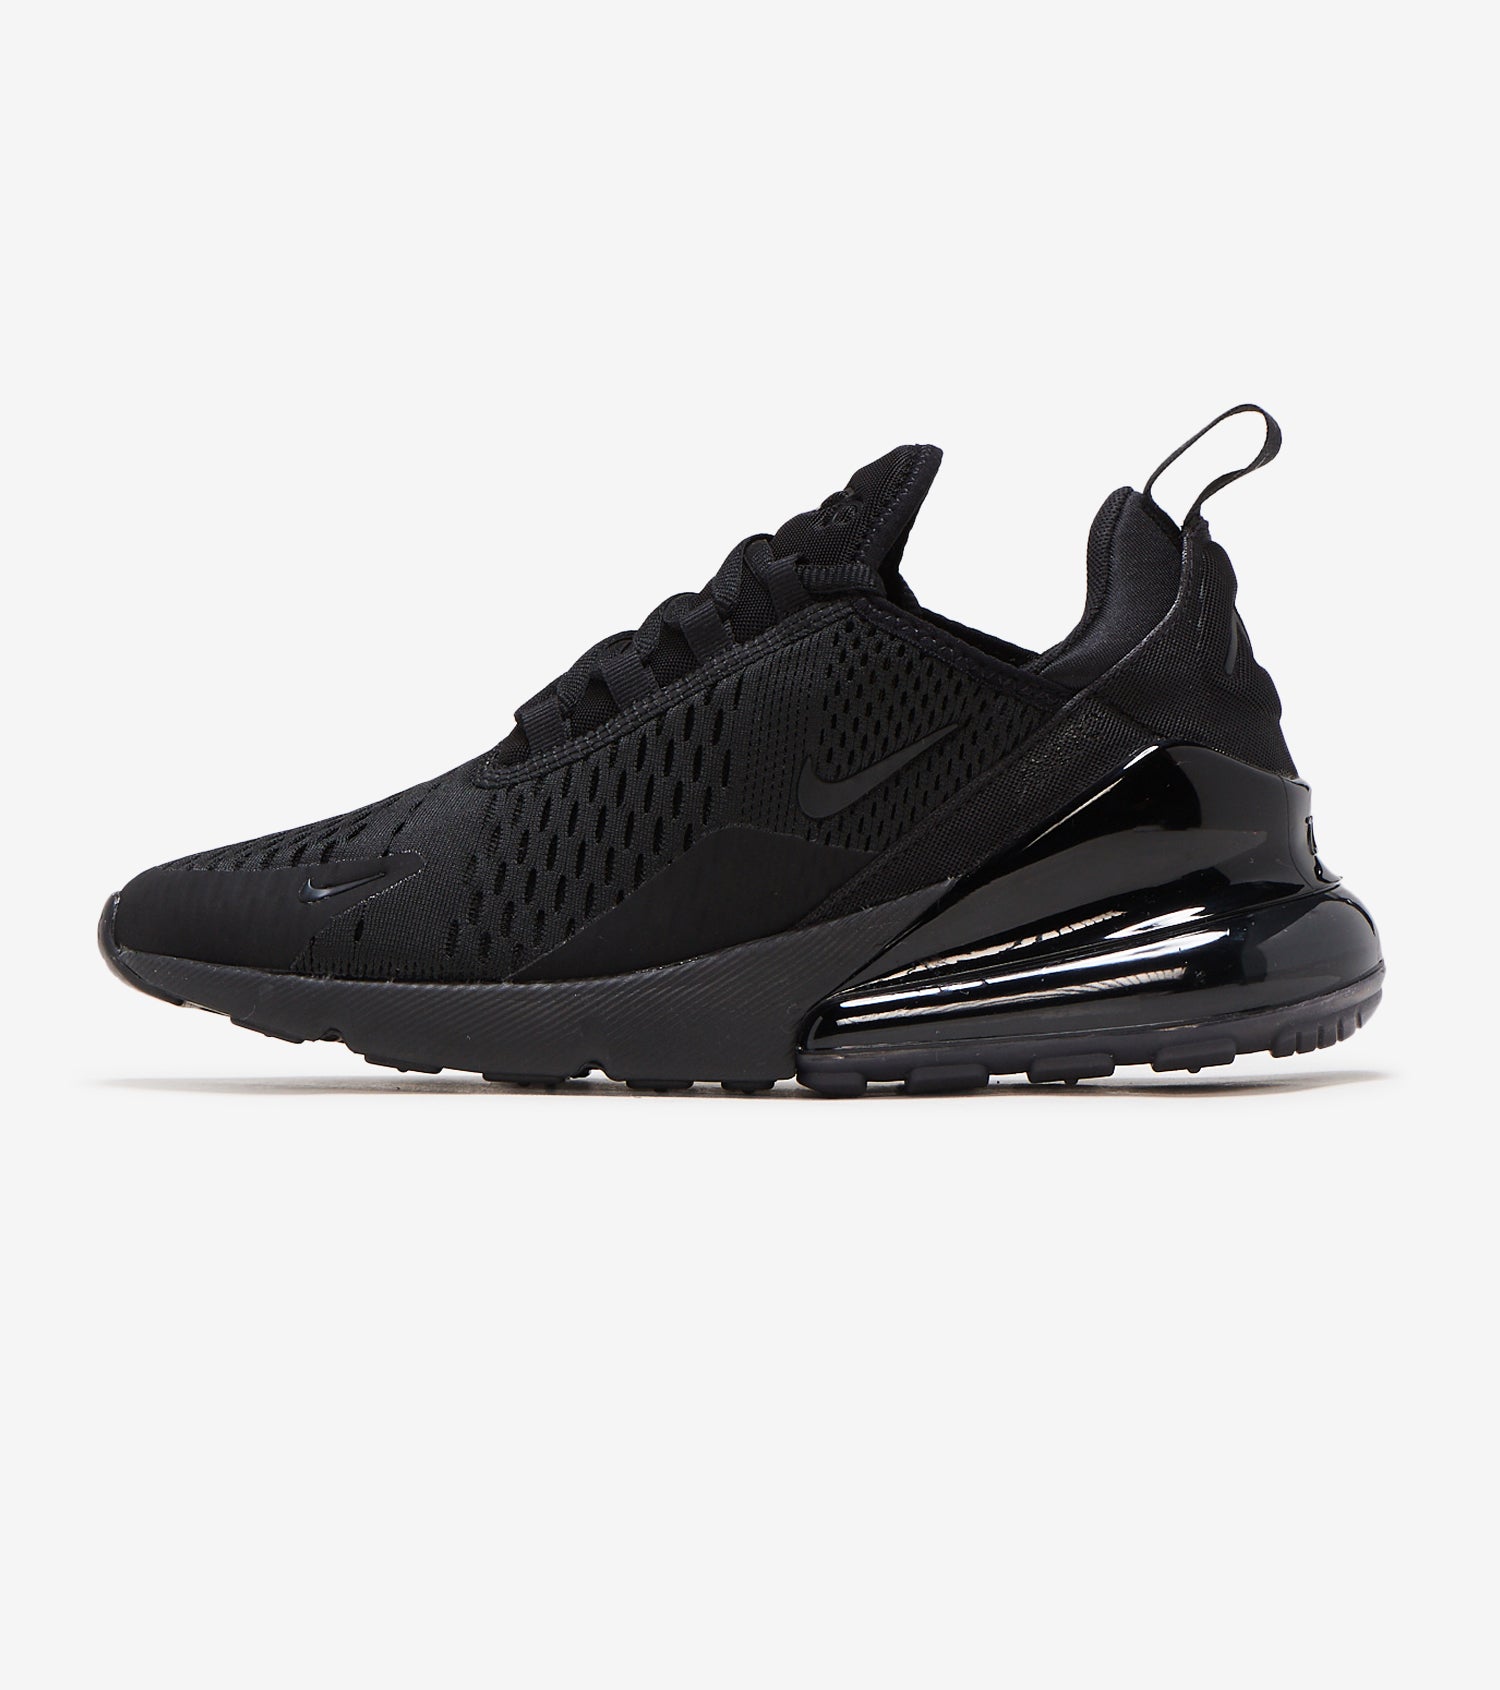 Get the Nike Air Max 270 Shoes in Black 